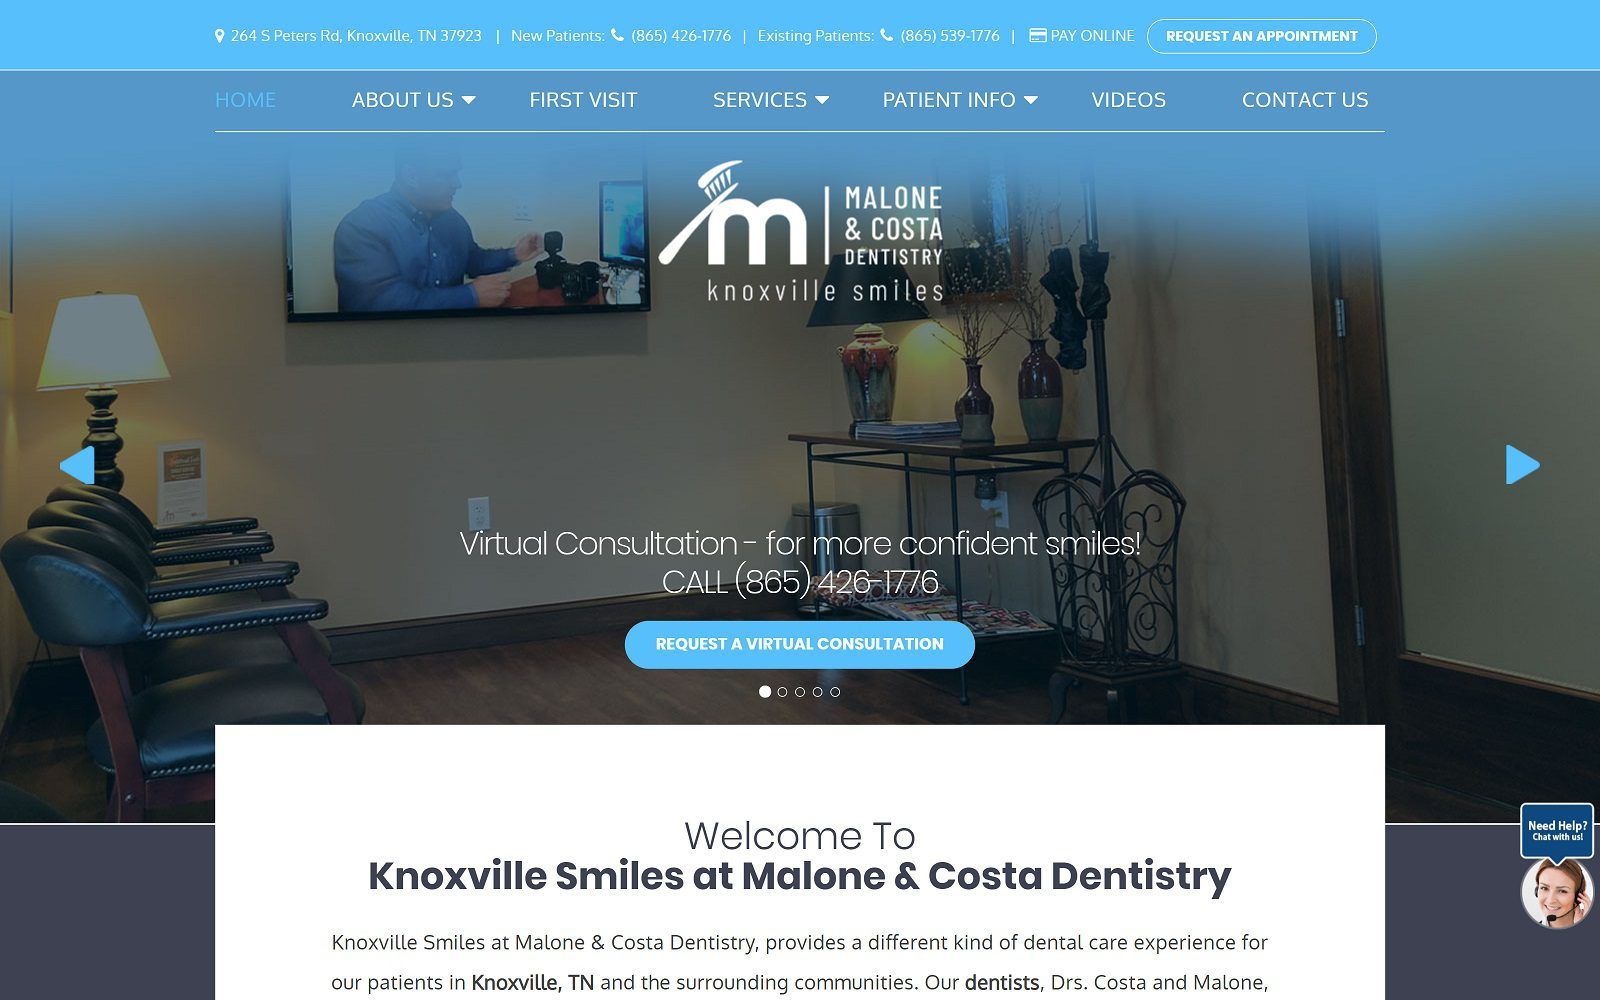 The Screenshot of Knoxville Smiles at Malone & Costa Dentistry knoxvillesmiles.com Website